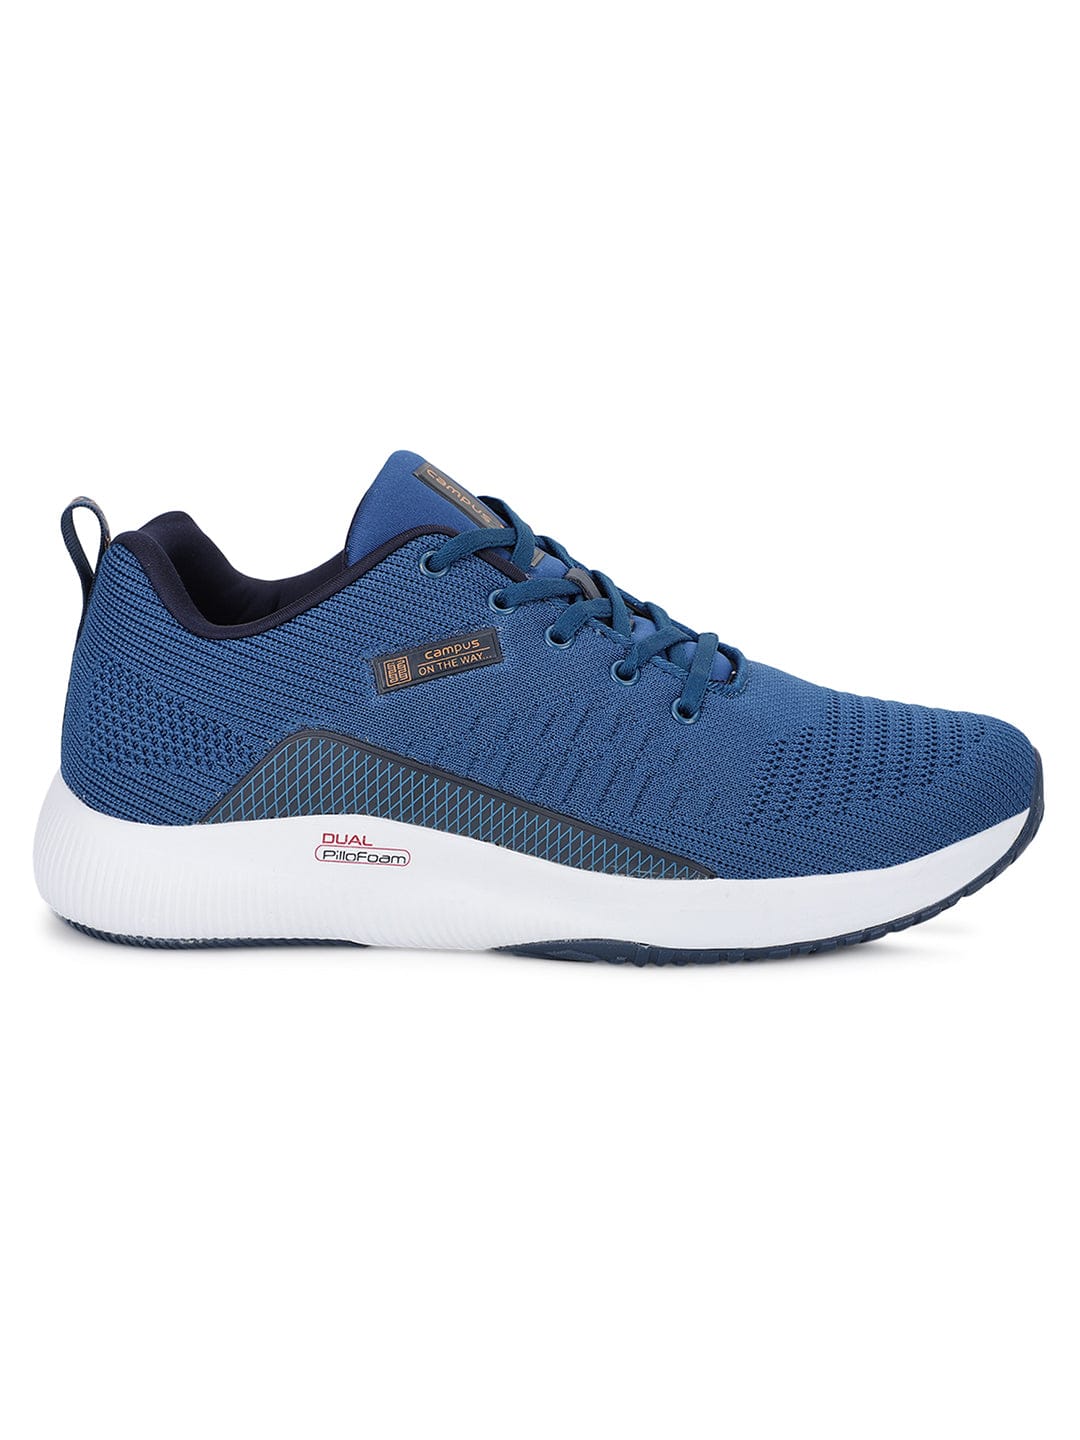 Buy Running Shoes For Men: Toll-Mod-Blu-Mstd | Campus Shoes